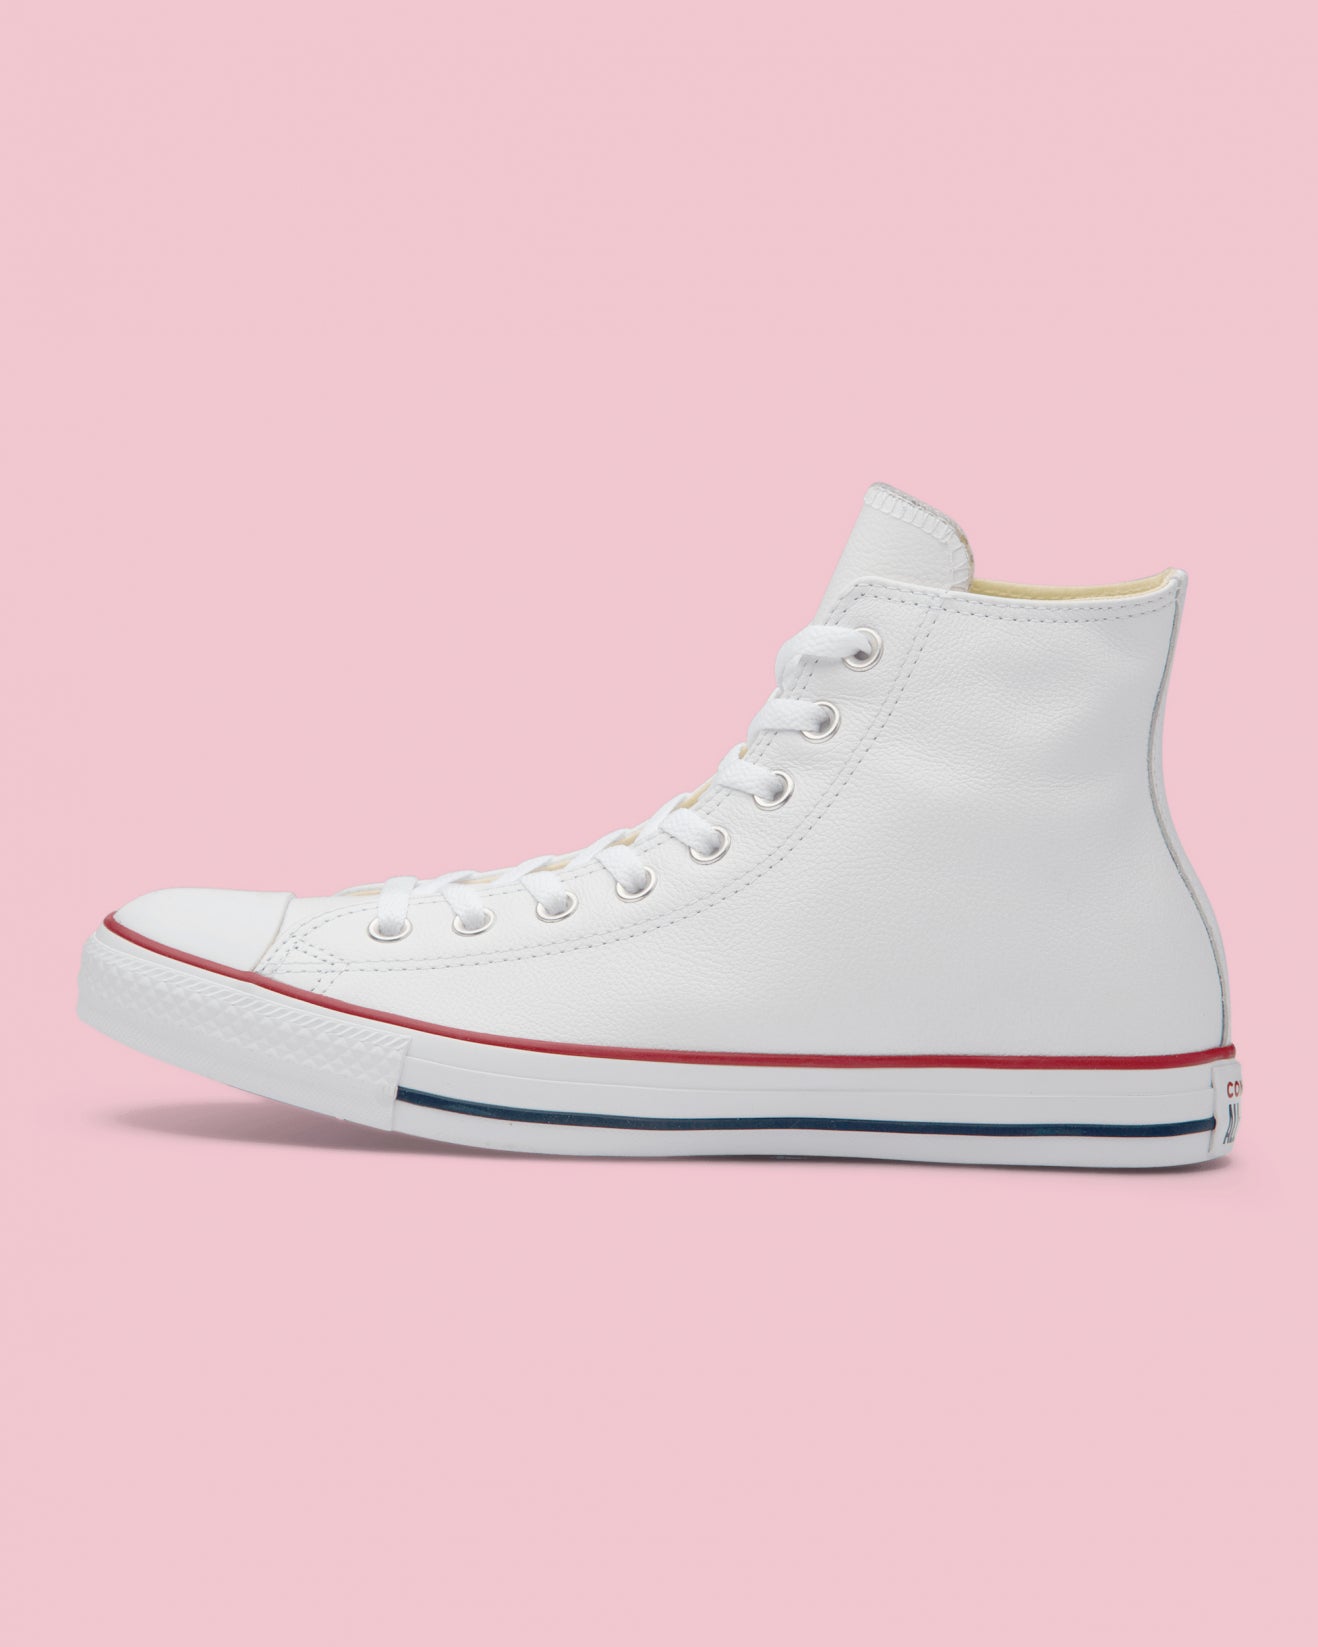 CONVERSE CHUCK TAYLOR LEATHER HIGH TOP WHITE